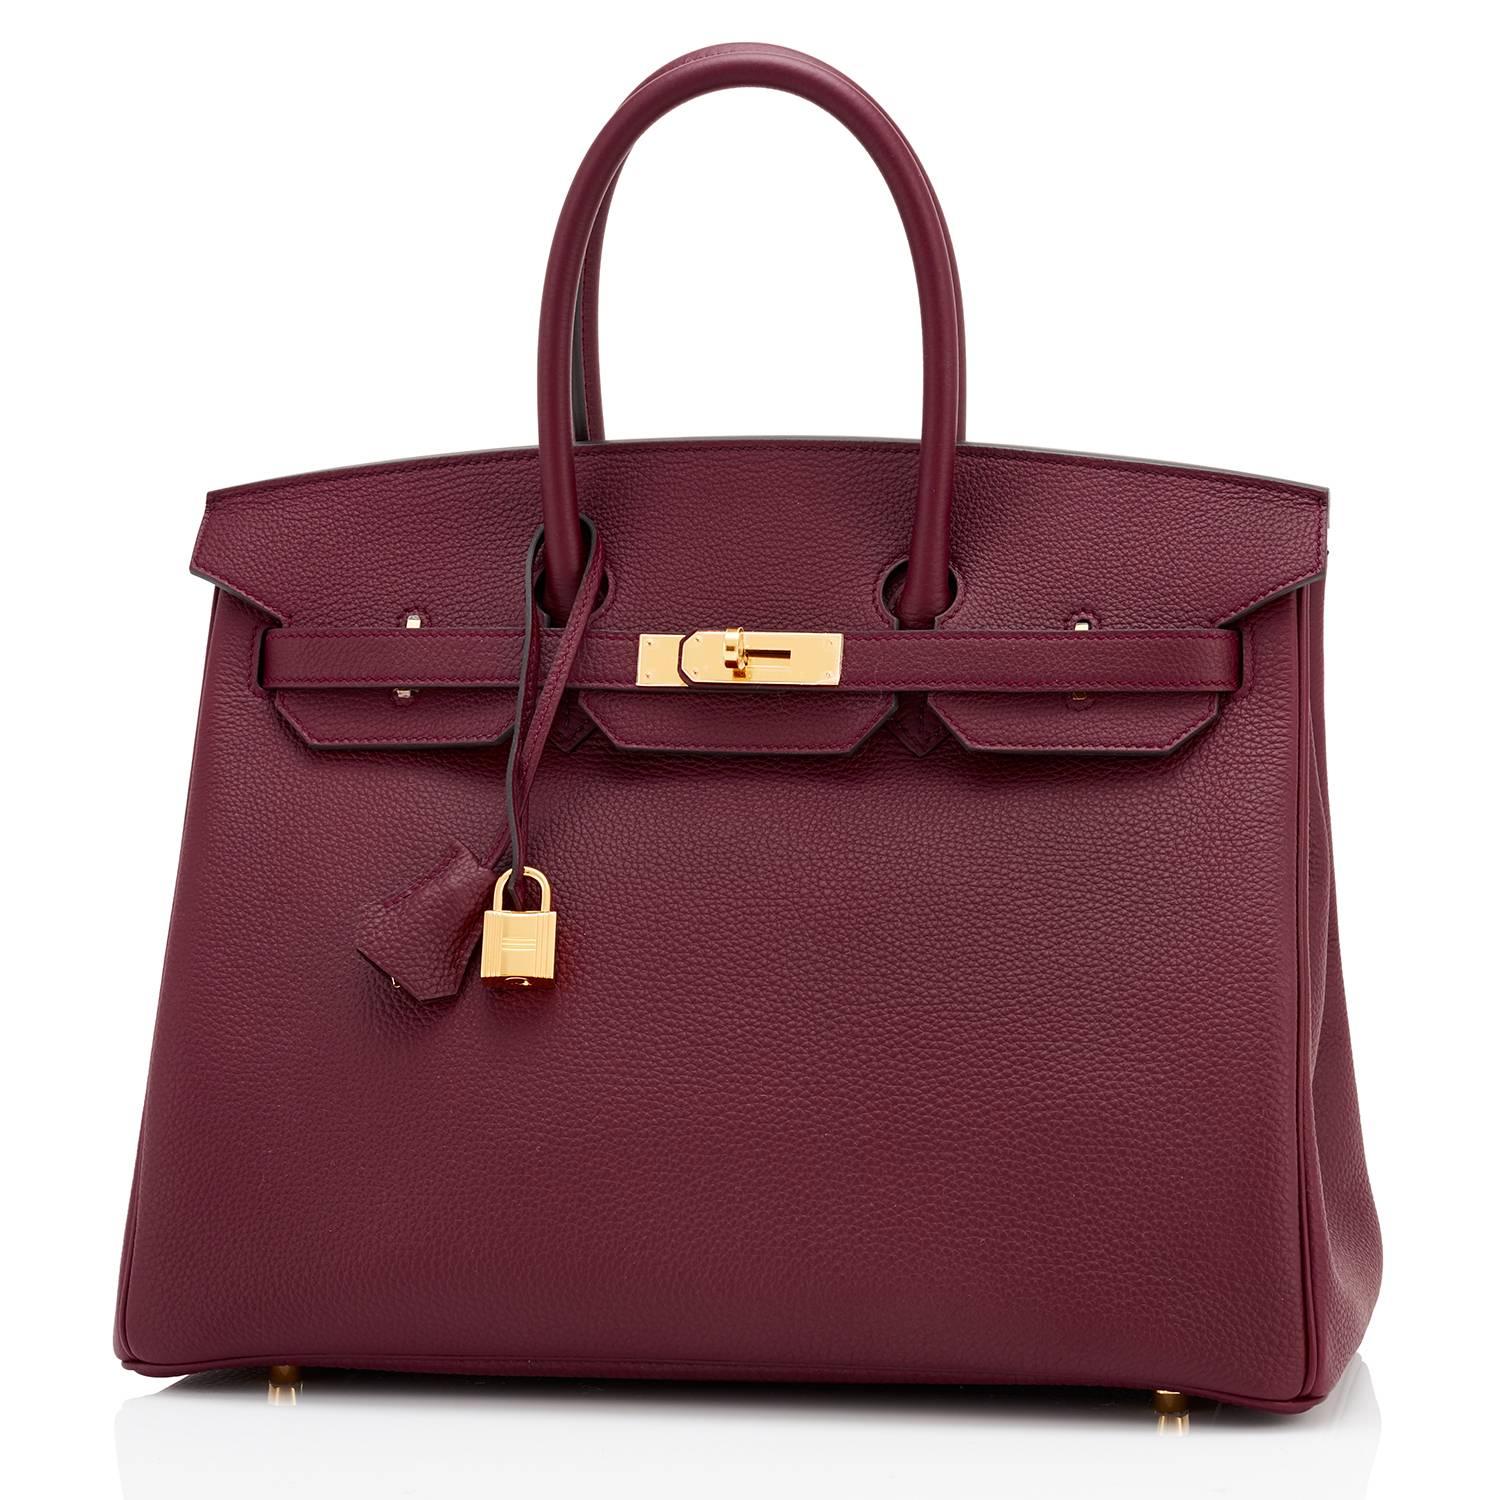 Hermes Bordeaux 35cm Birkin Togo Gold Hardware D Stamp 
Brand New in Box. Store fresh. Pristine condition (with plastic on hardware). 
Just purchased from Hermes store; bag bears new 2019 interior D stamp.
Perfect gift! Comes with keys, lock,